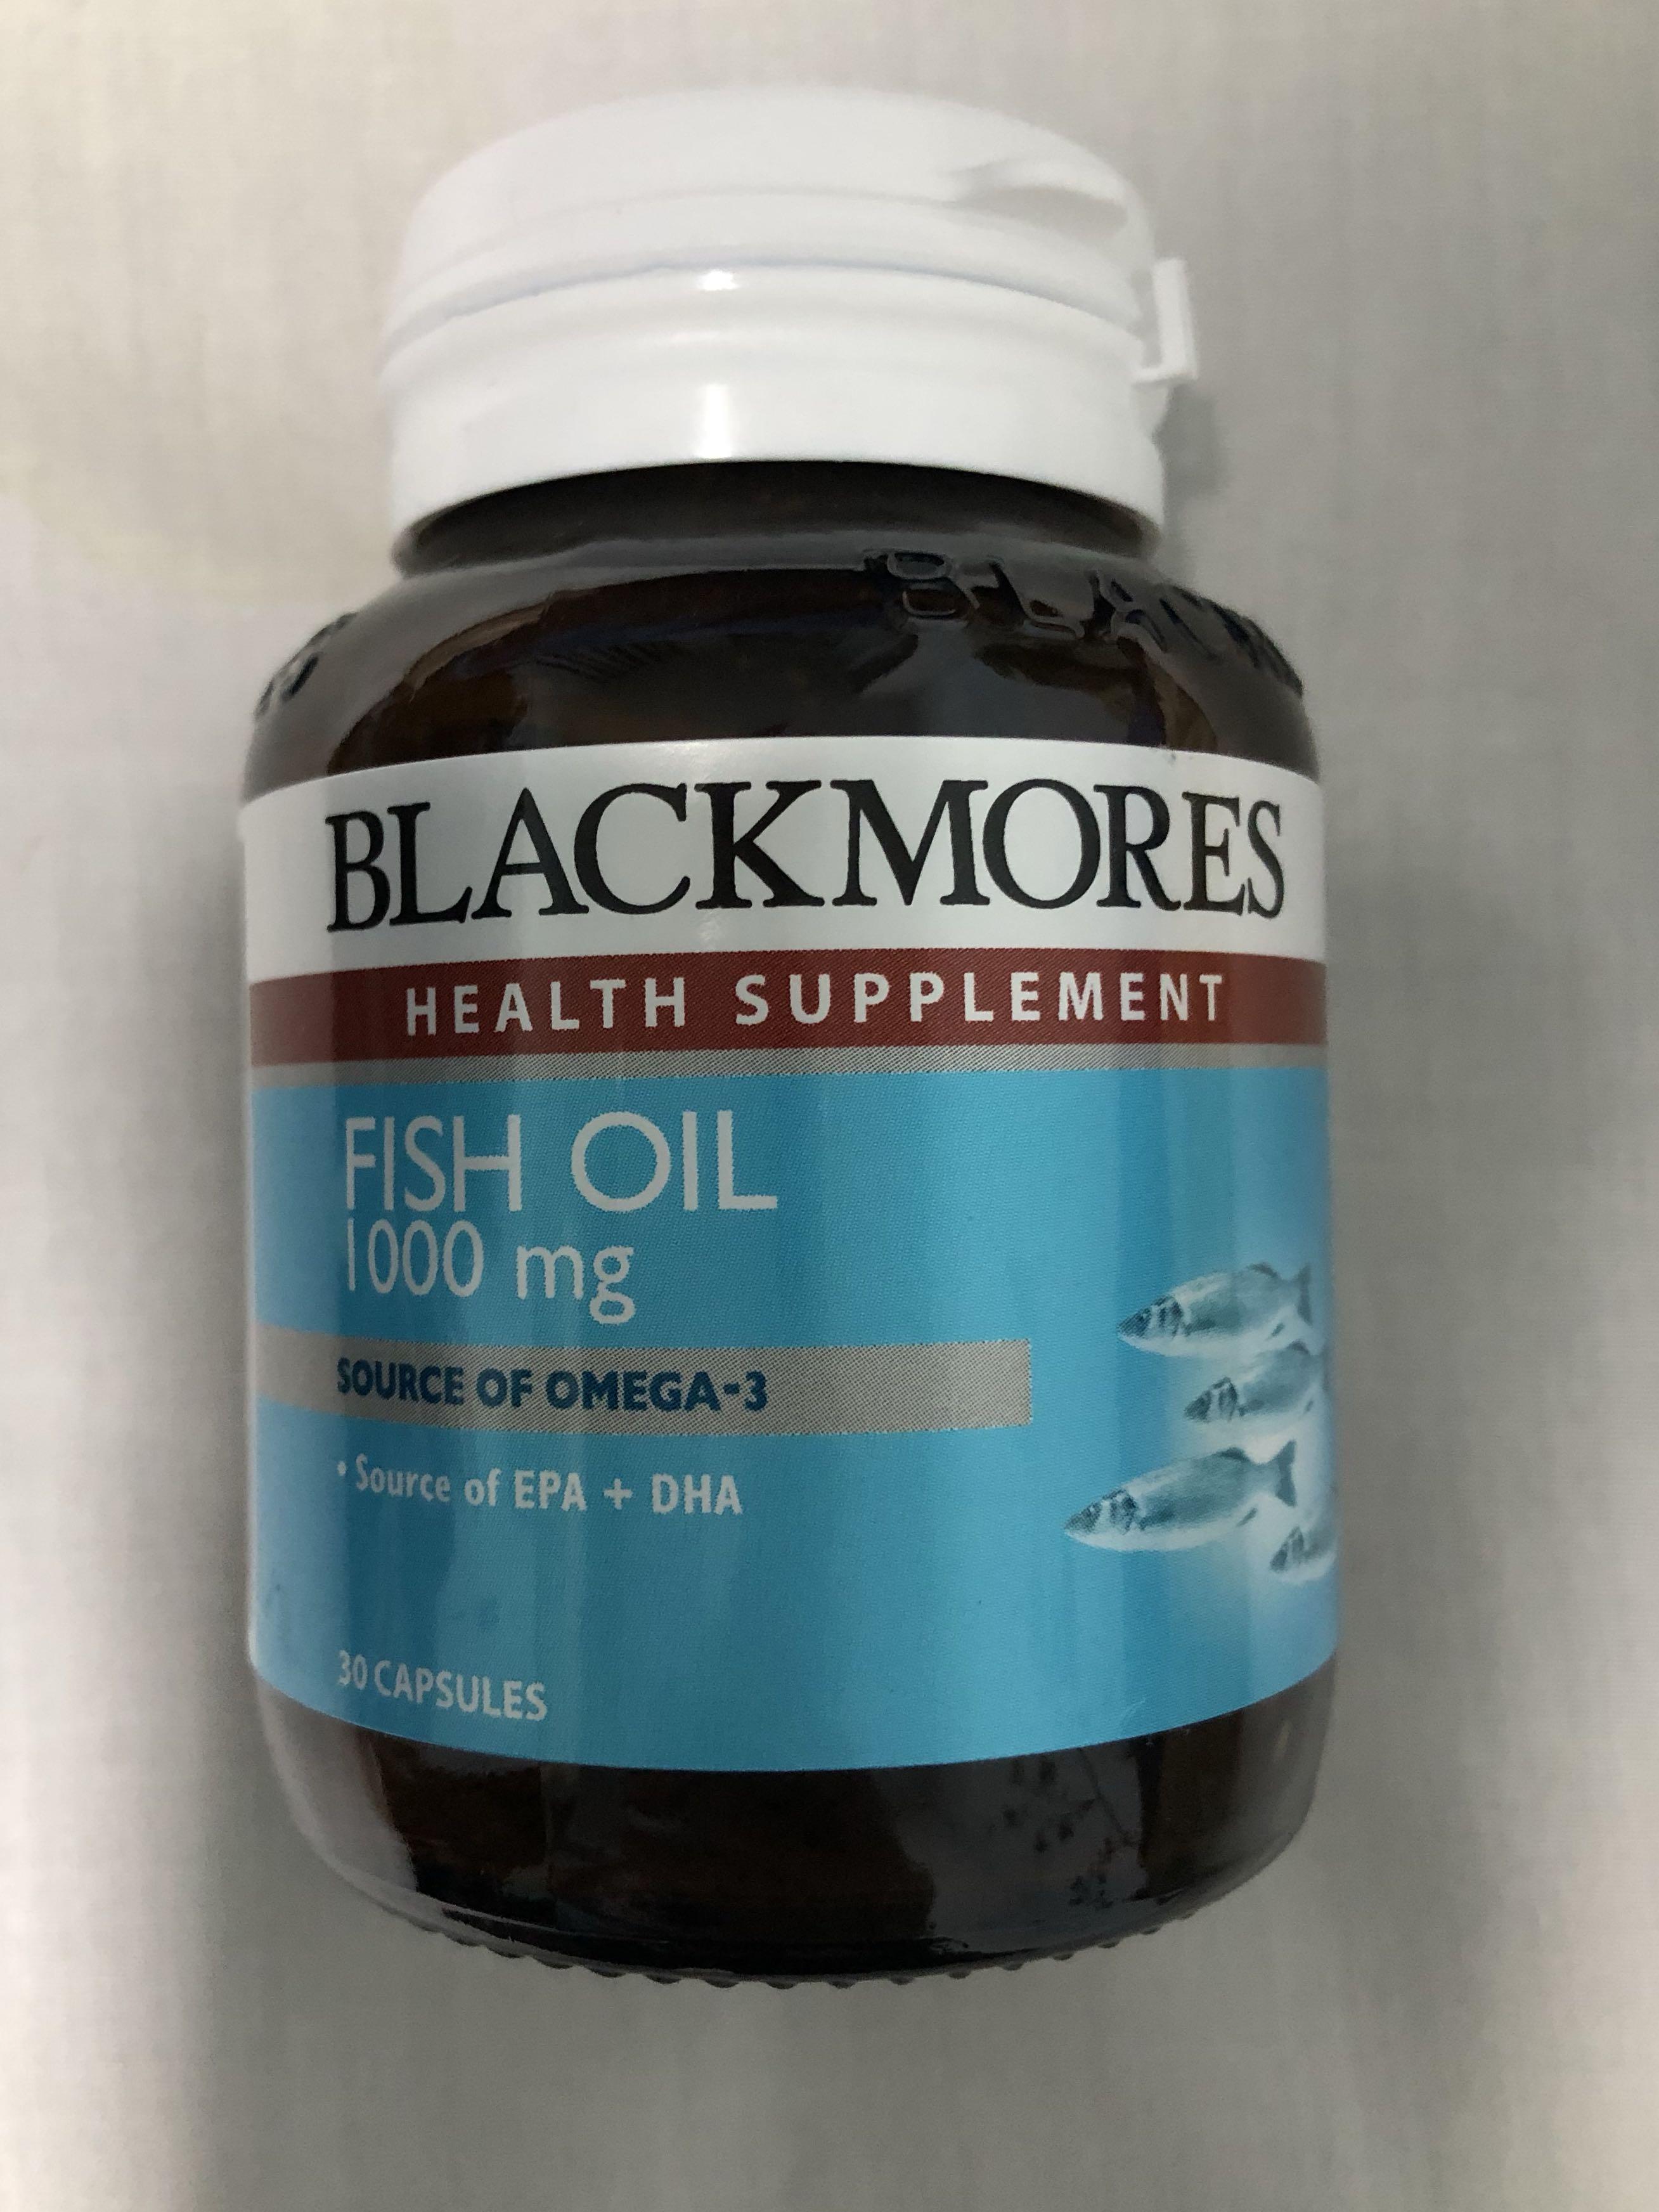 Blackmores Fish Oil 1000 Mg Health Supplement Health Beauty Bath Body On Carousell